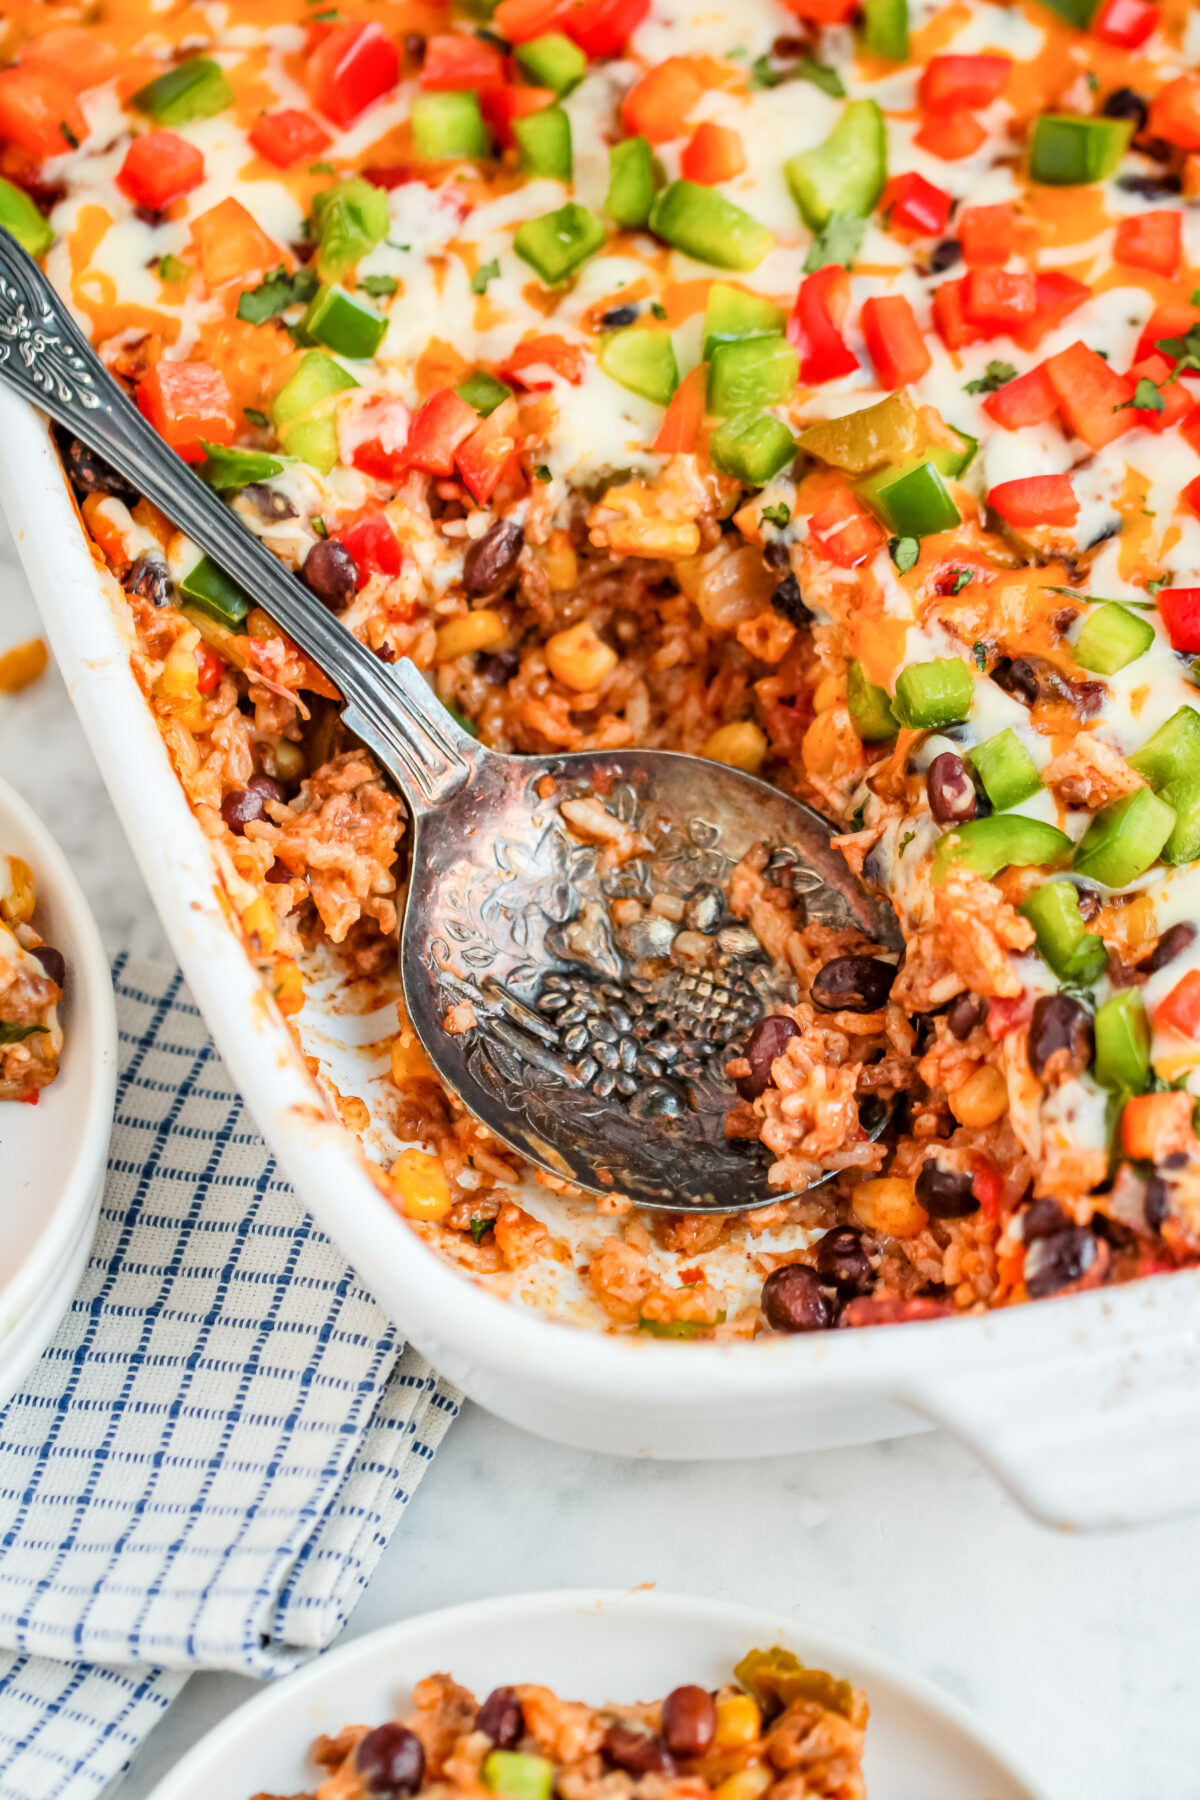 This easy Mexican ground beef casserole recipe is perfect for a weeknight meal! It's a hearty, comforting, and delicious casserole.